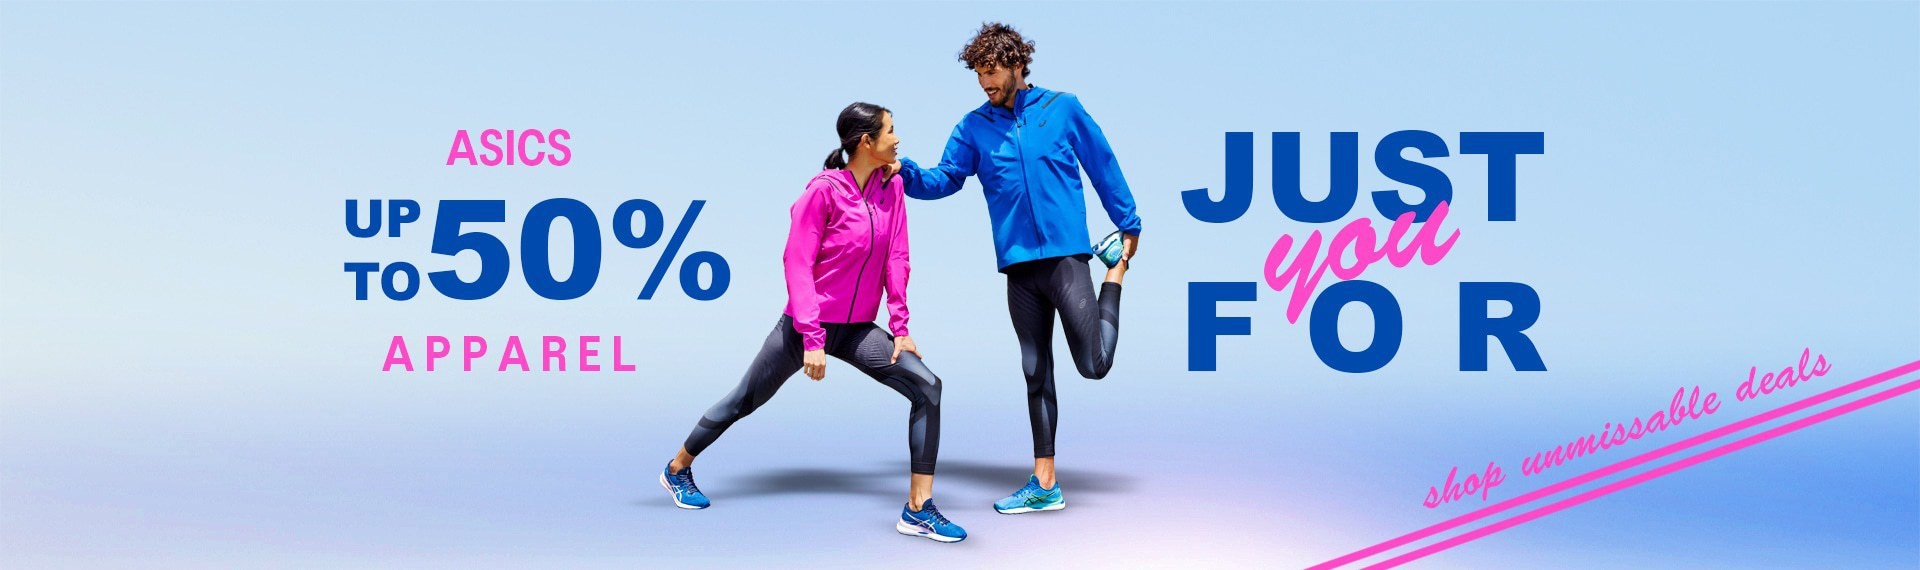 ASICS APPAREL UP TO 50%